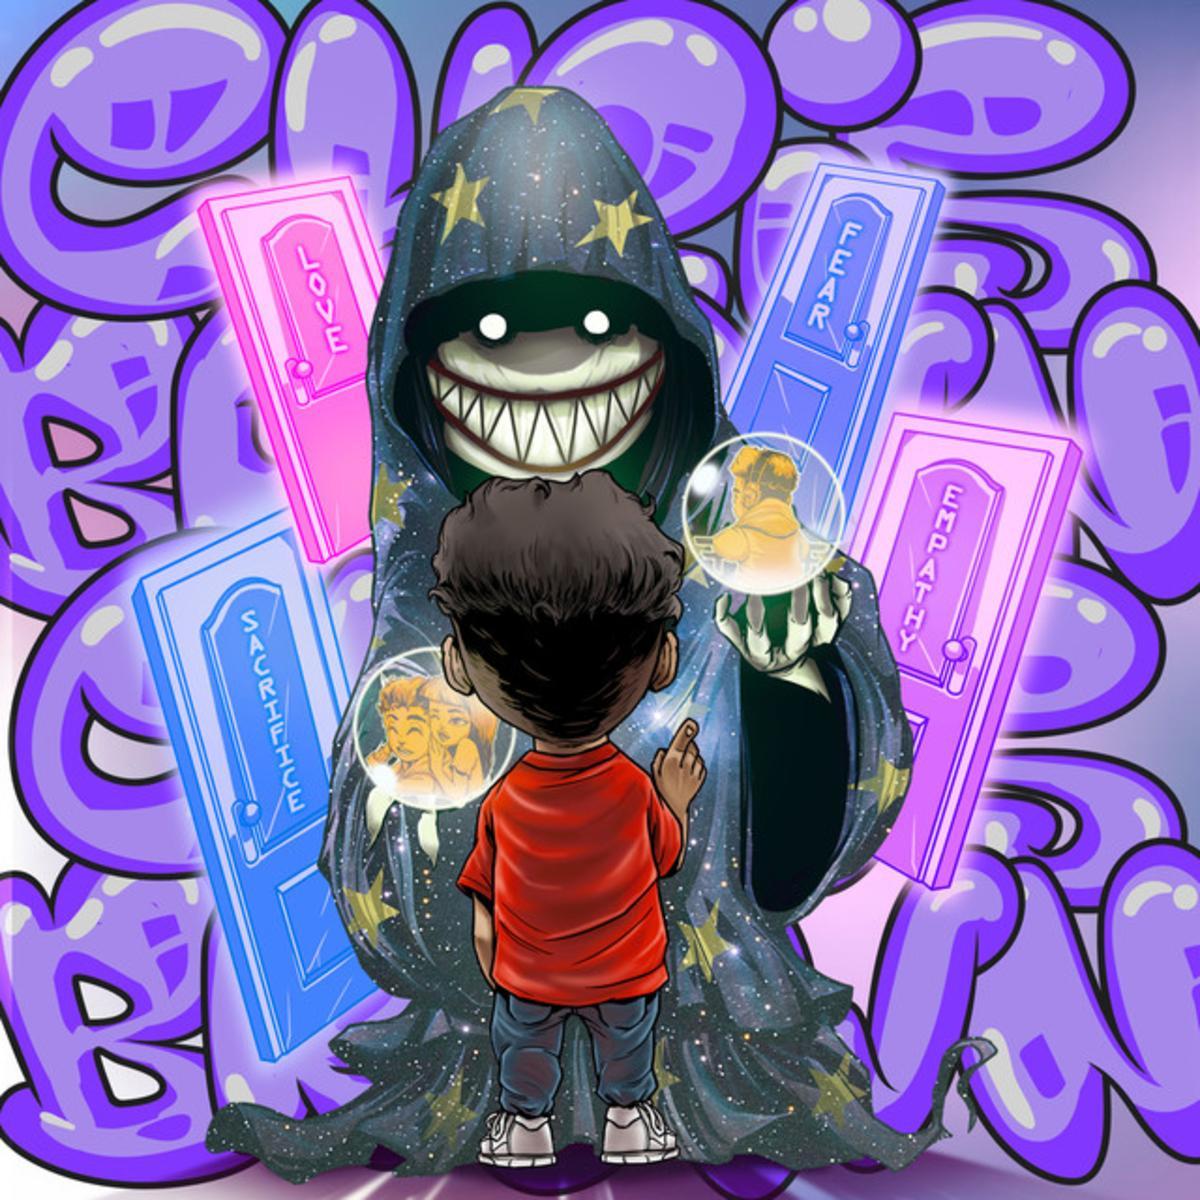 Chris Brown Releases New Single Undecided